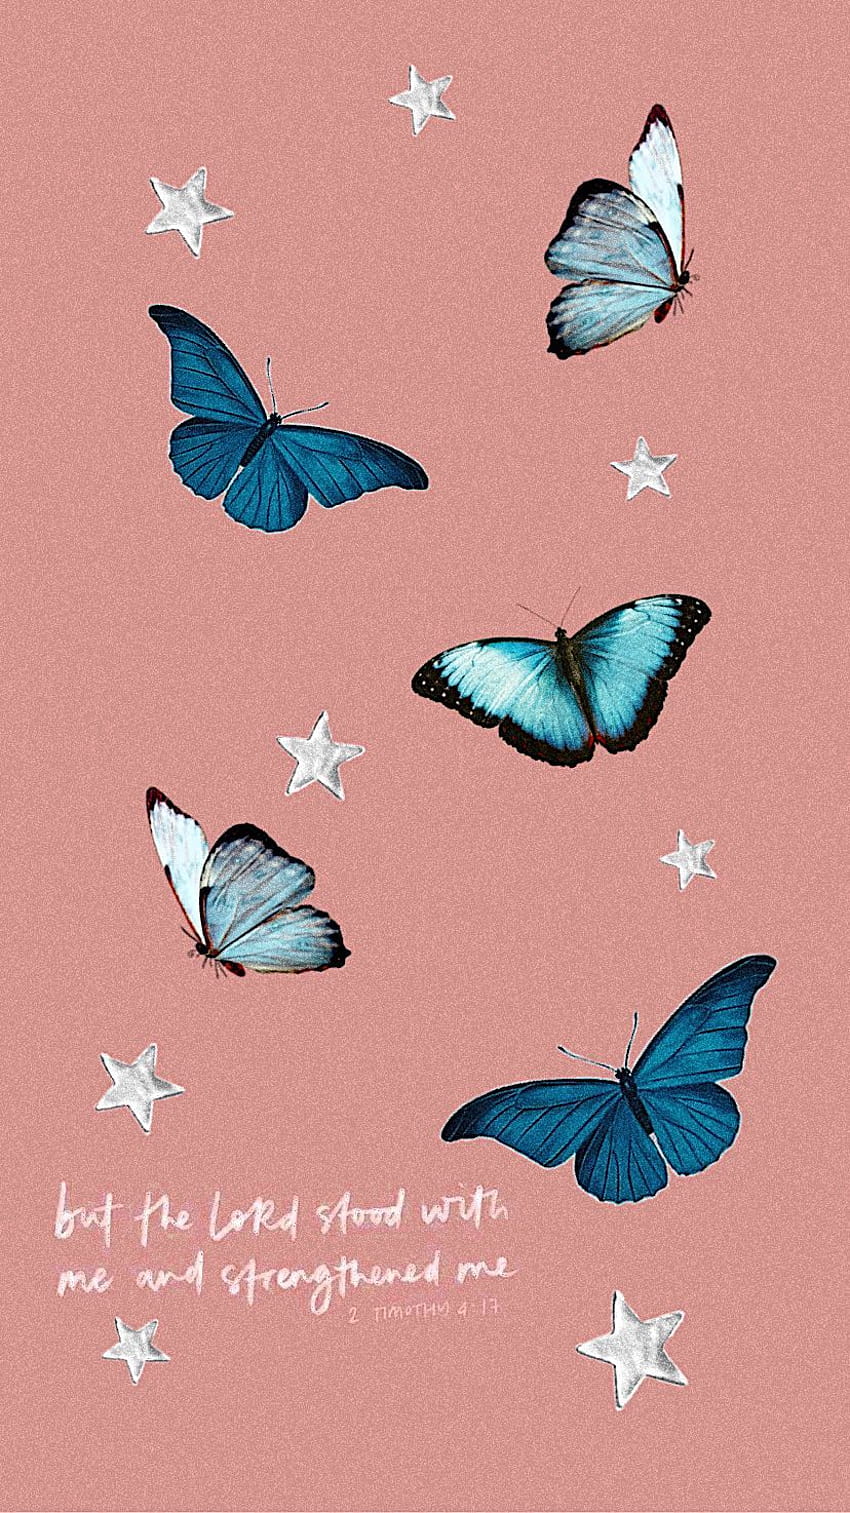 A poster with butterflies and stars on it - VSCO